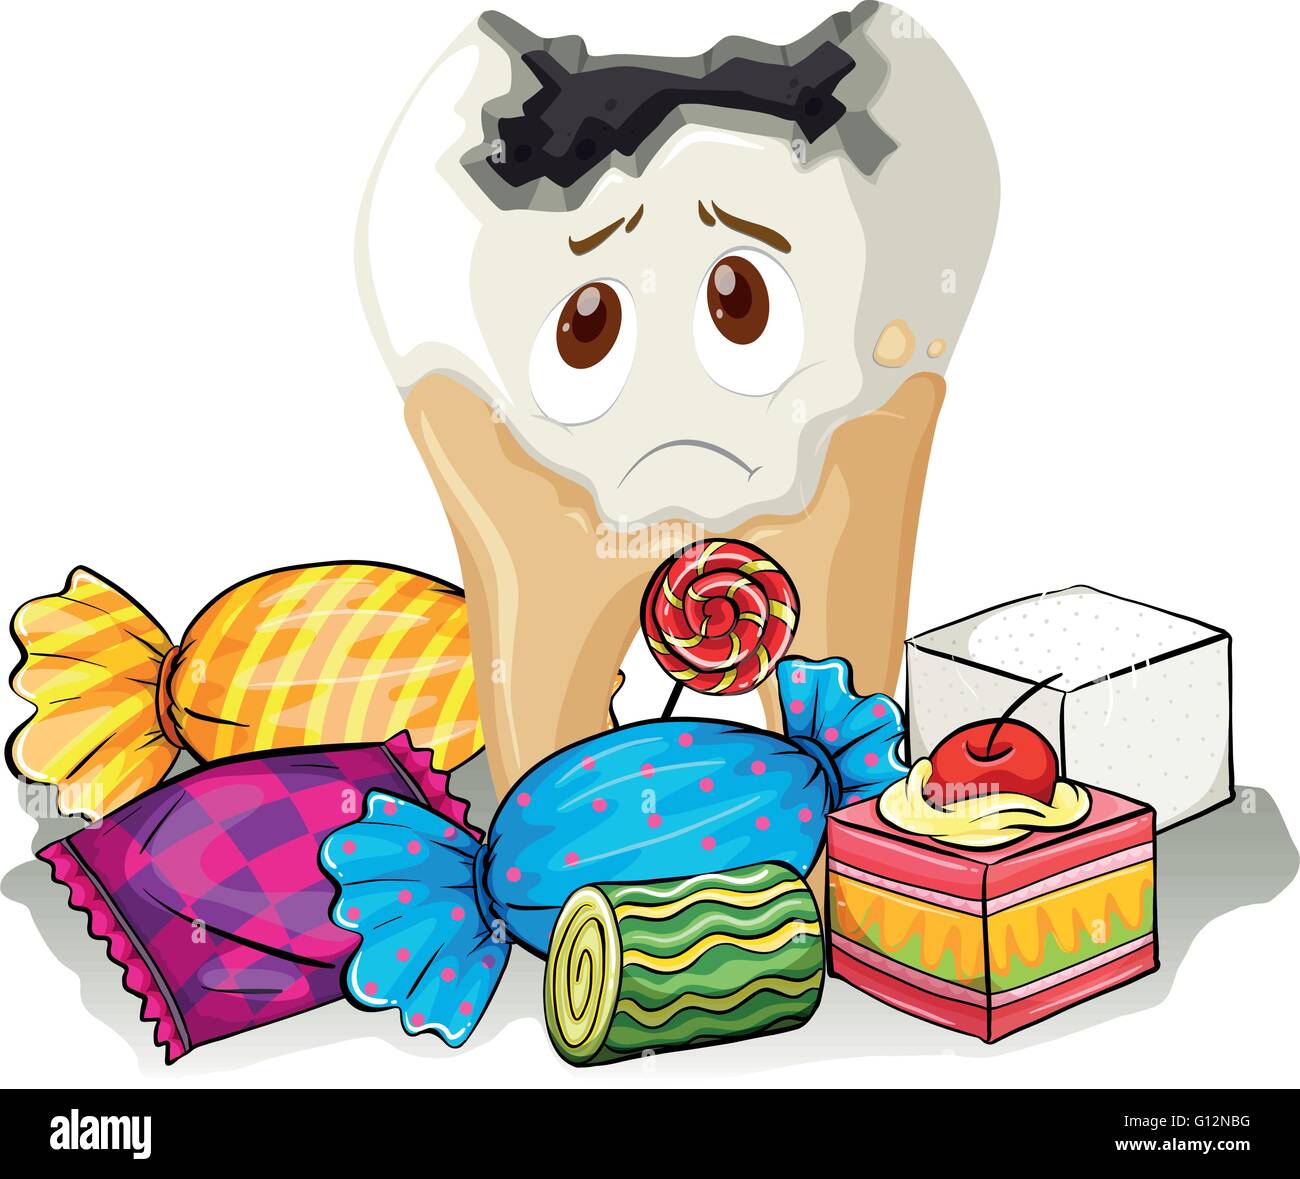 clipart tooth decay - photo #21